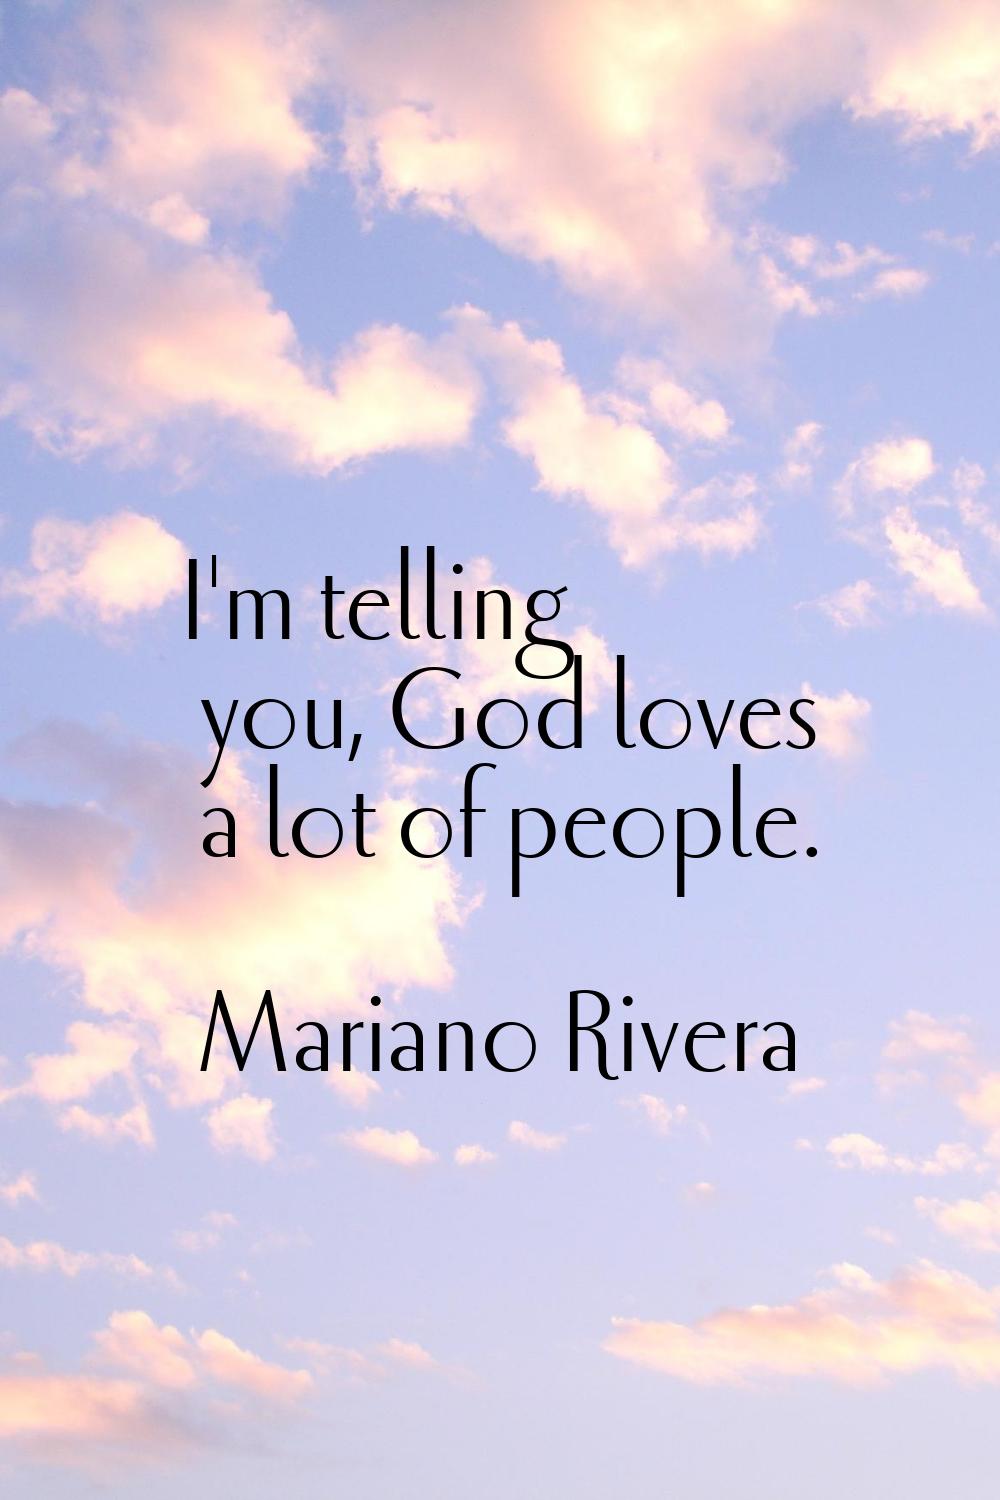 I'm telling you, God loves a lot of people.